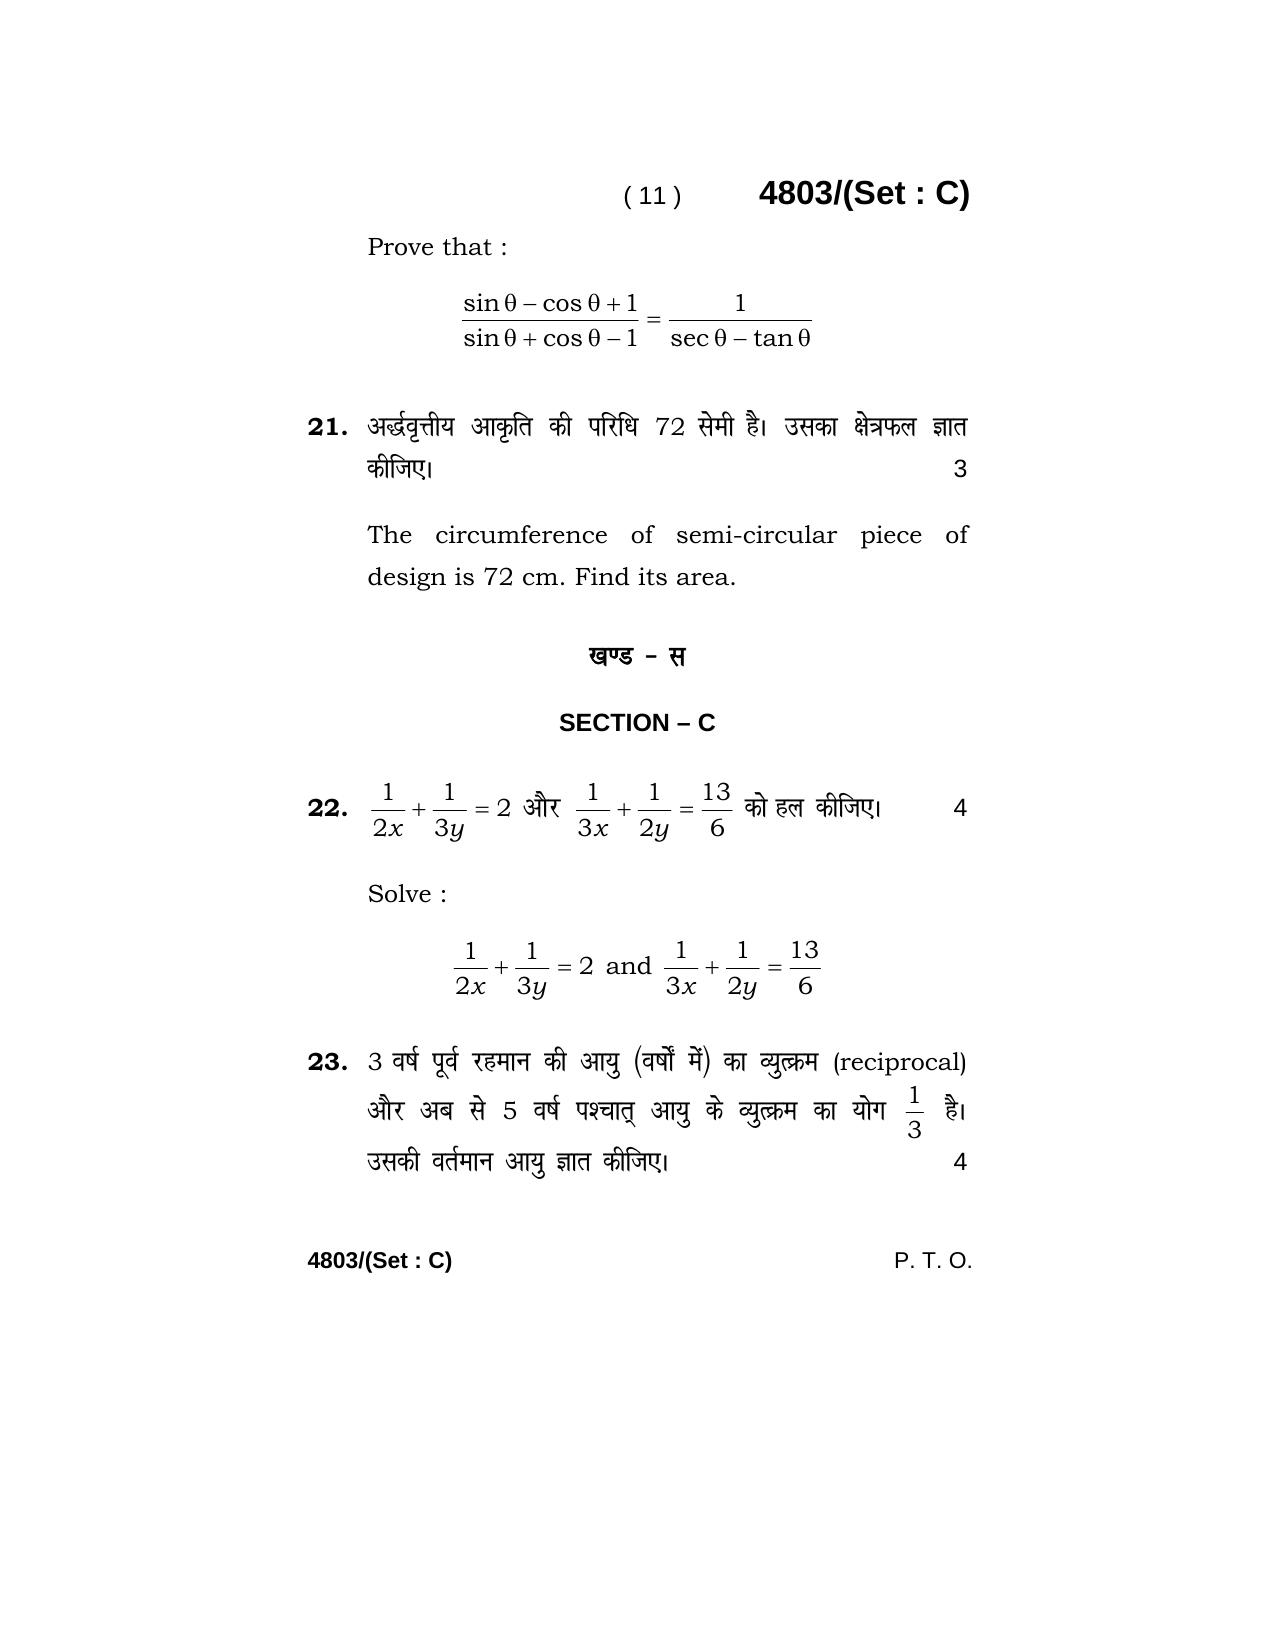 Haryana Board HBSE Class 10 Mathematics 2020 Question Paper - Page 43